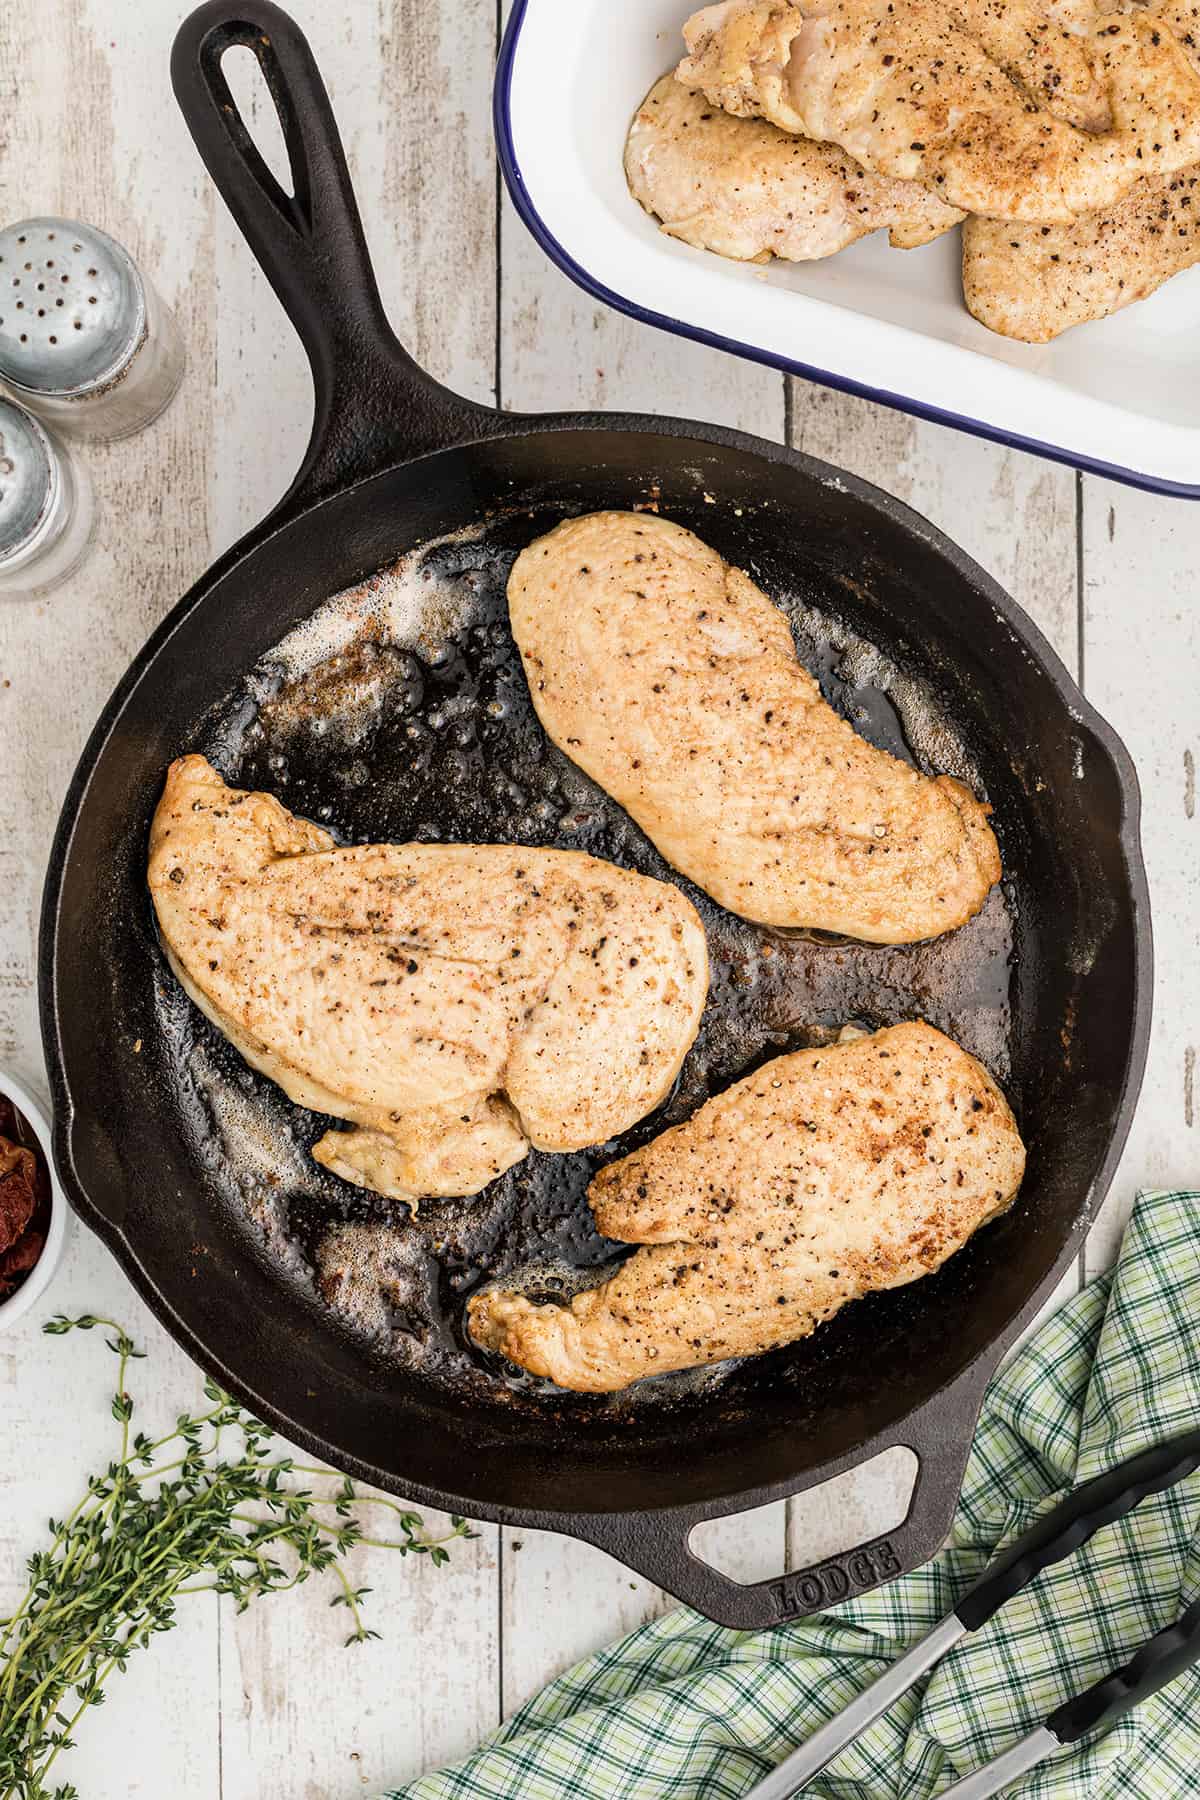 Sauteed chicken breasts in a skillet.